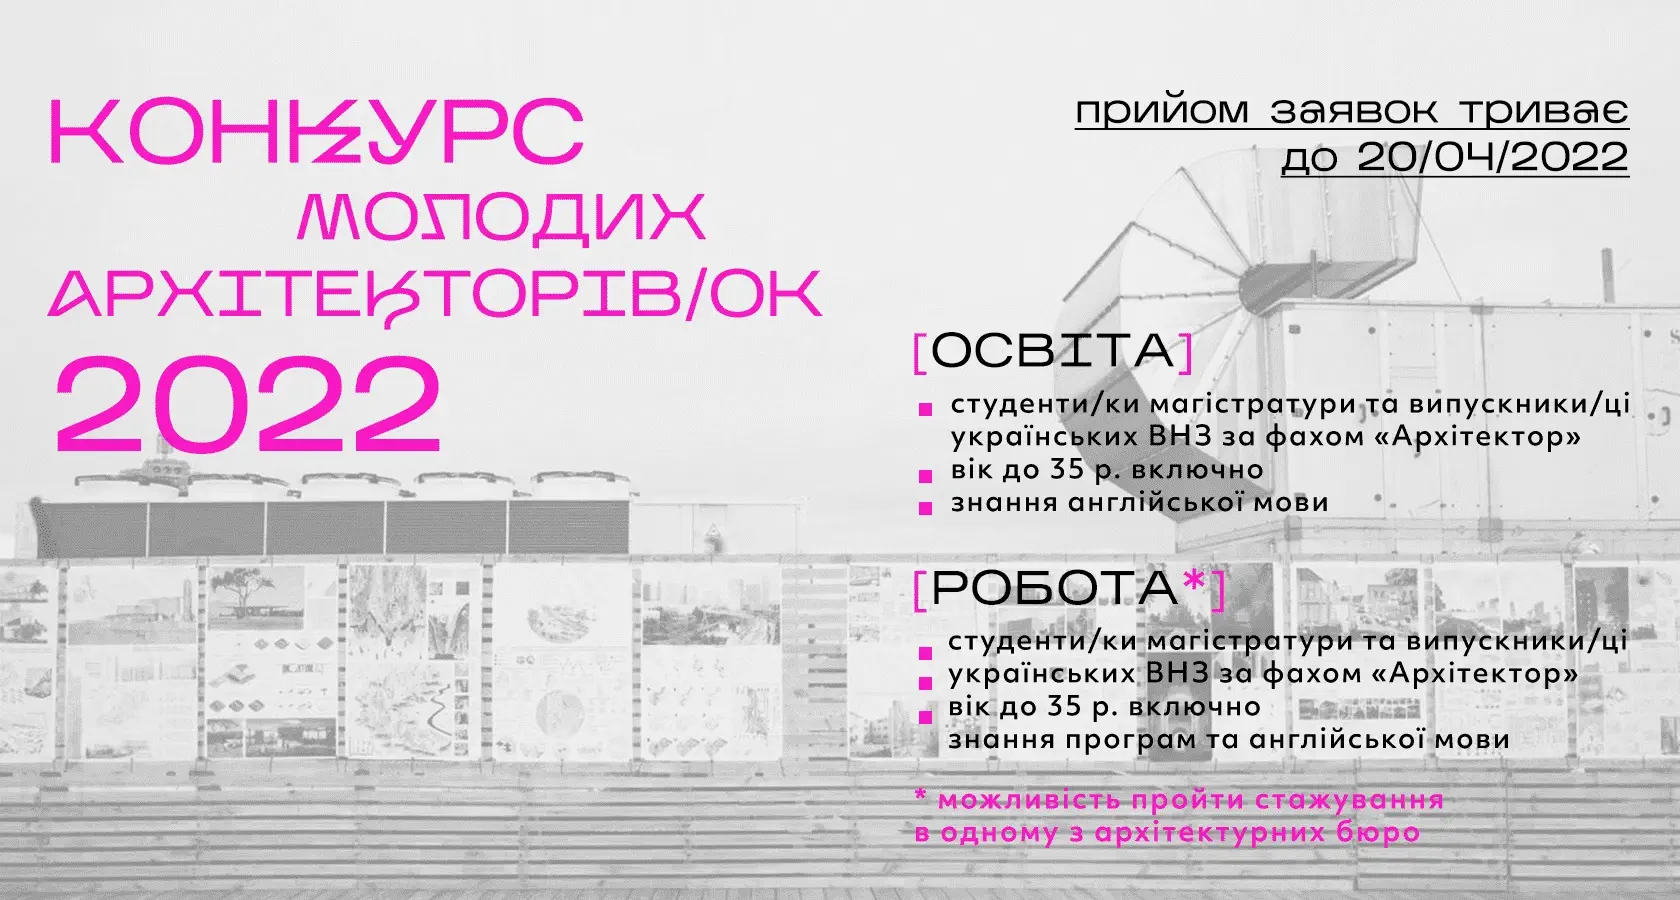 The CANactions educational platform invites you to the 14th Young Architects Competition of Ukraine 2022